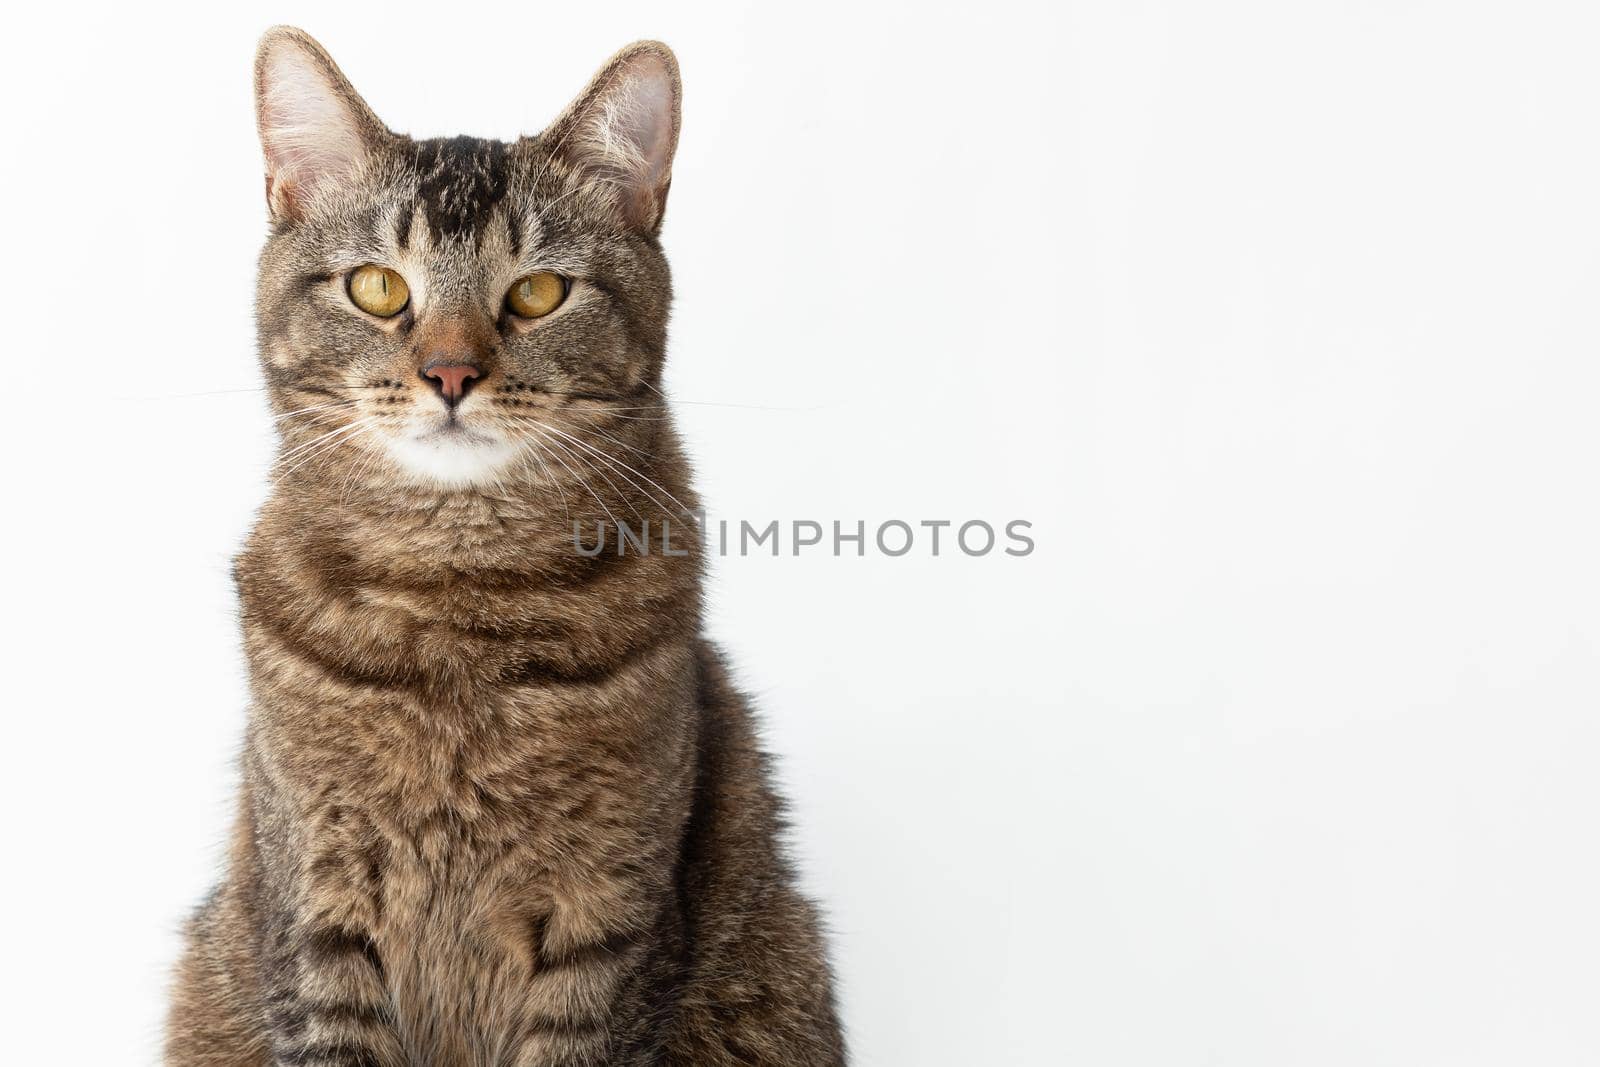 Isolated tricolor cat with yellow eyes looking aside on white background